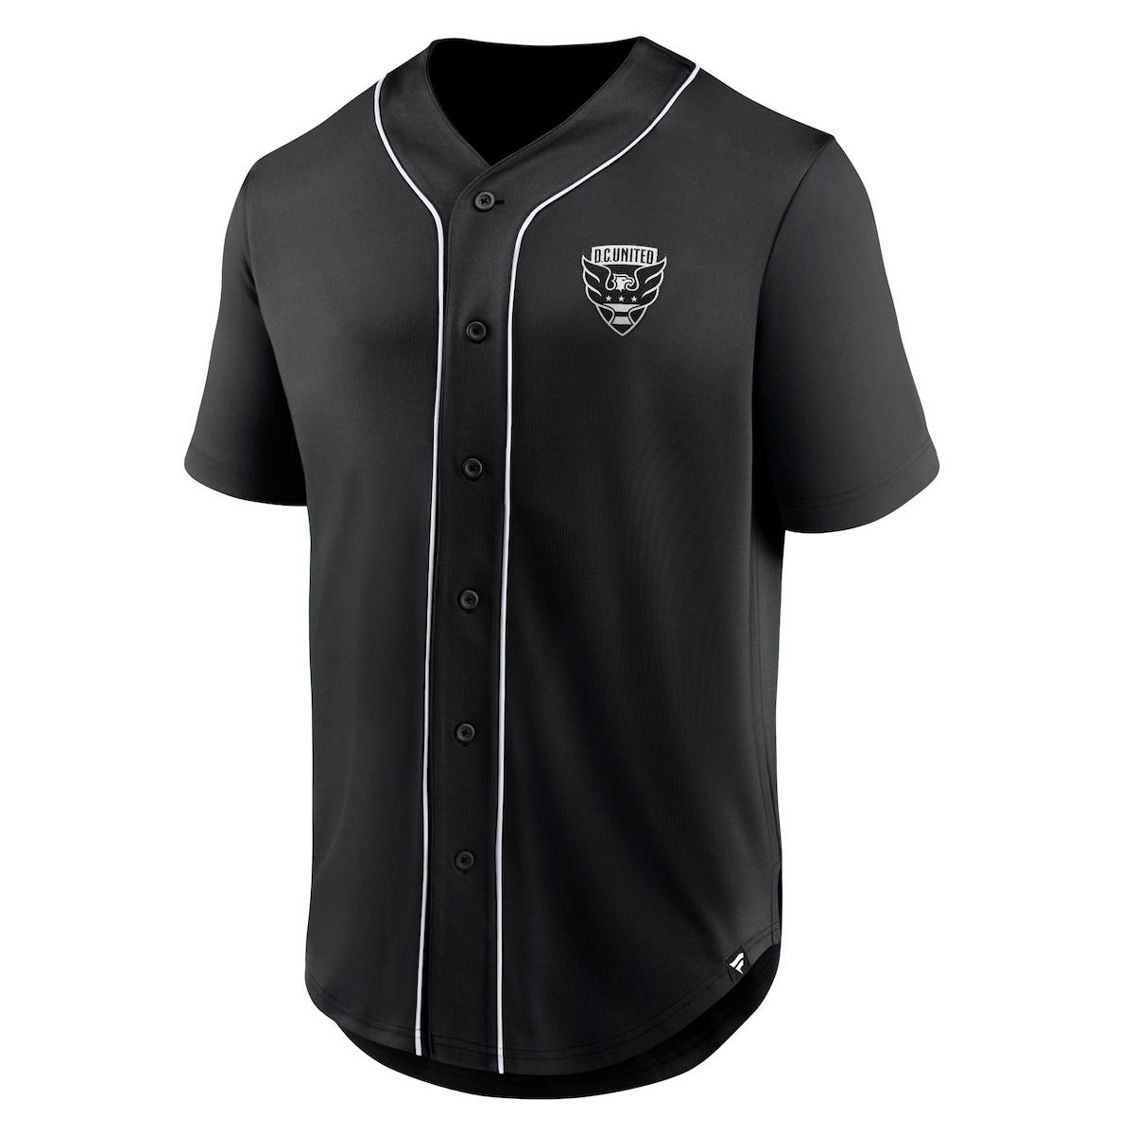 Fanatics Branded Men's Black D.C. United Third Period Fashion Baseball Button-Up Jersey - Image 3 of 4